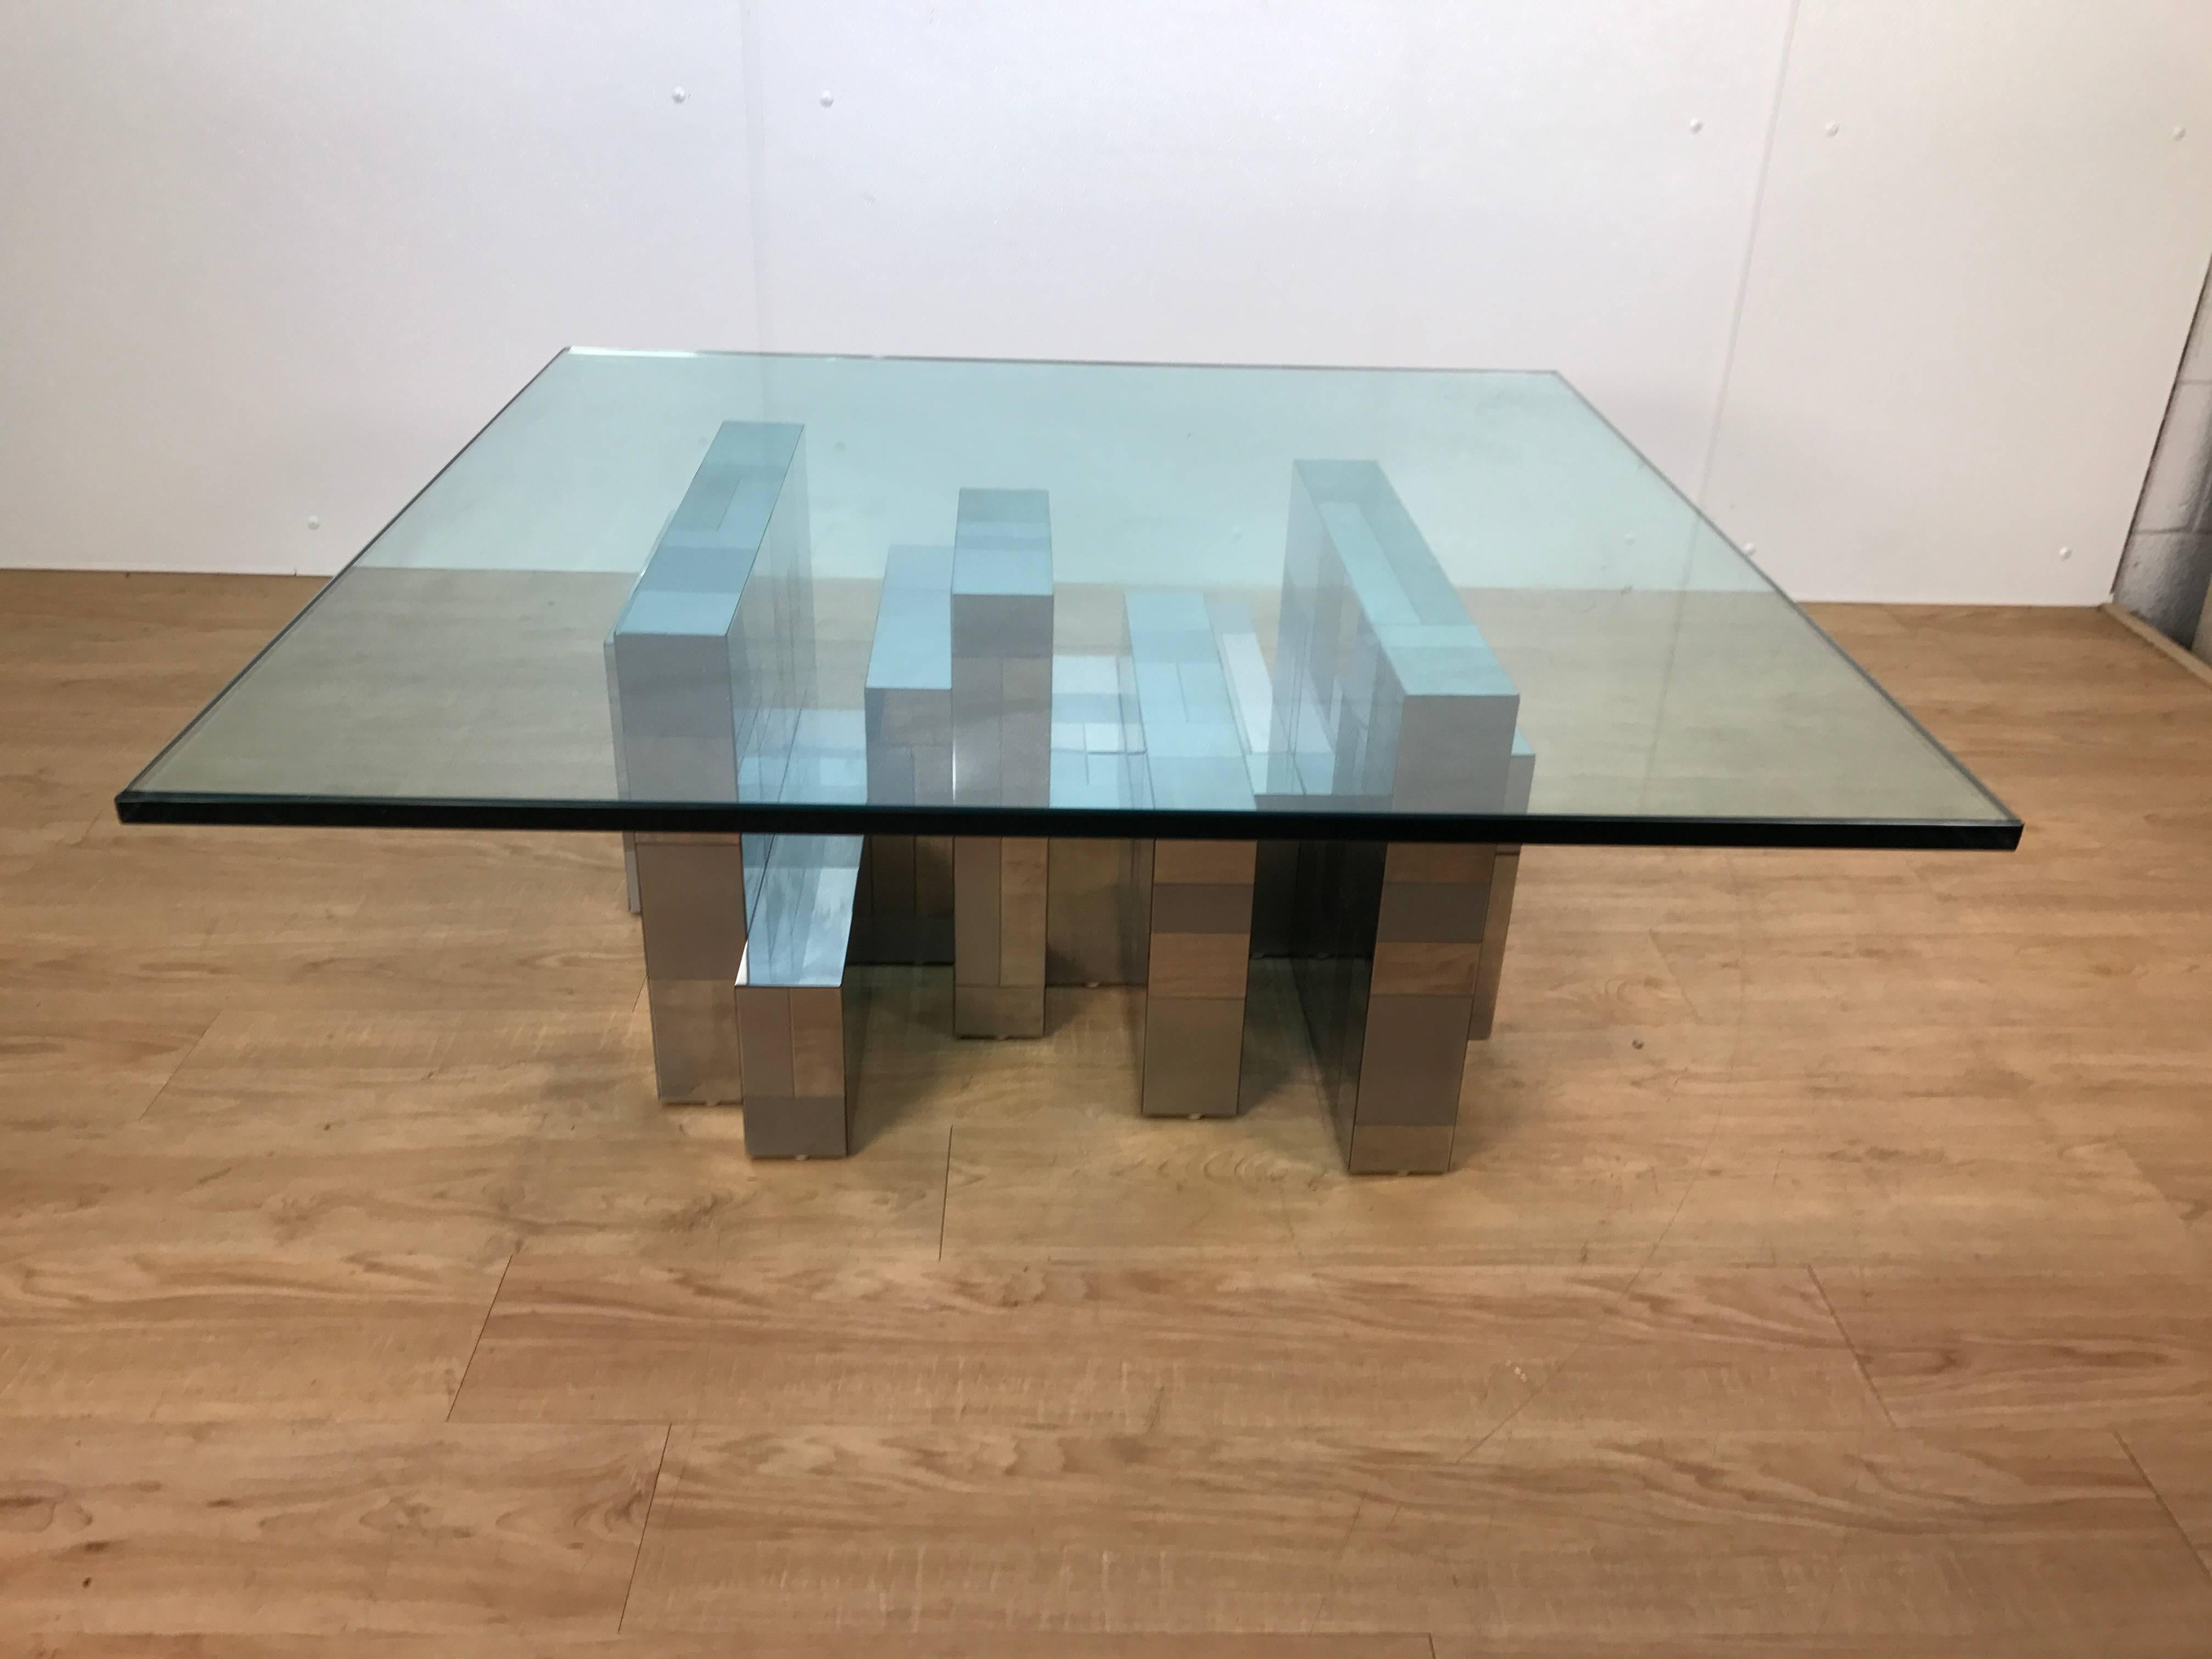 Large Paul Evans ten segment chrome coffee table, for Directional. This iconic Mid-Century Modern example is in near mint condition, with numerous two-tone polished and satin chrome mosaic silver reflective tiles. Signed Paul Evans Original